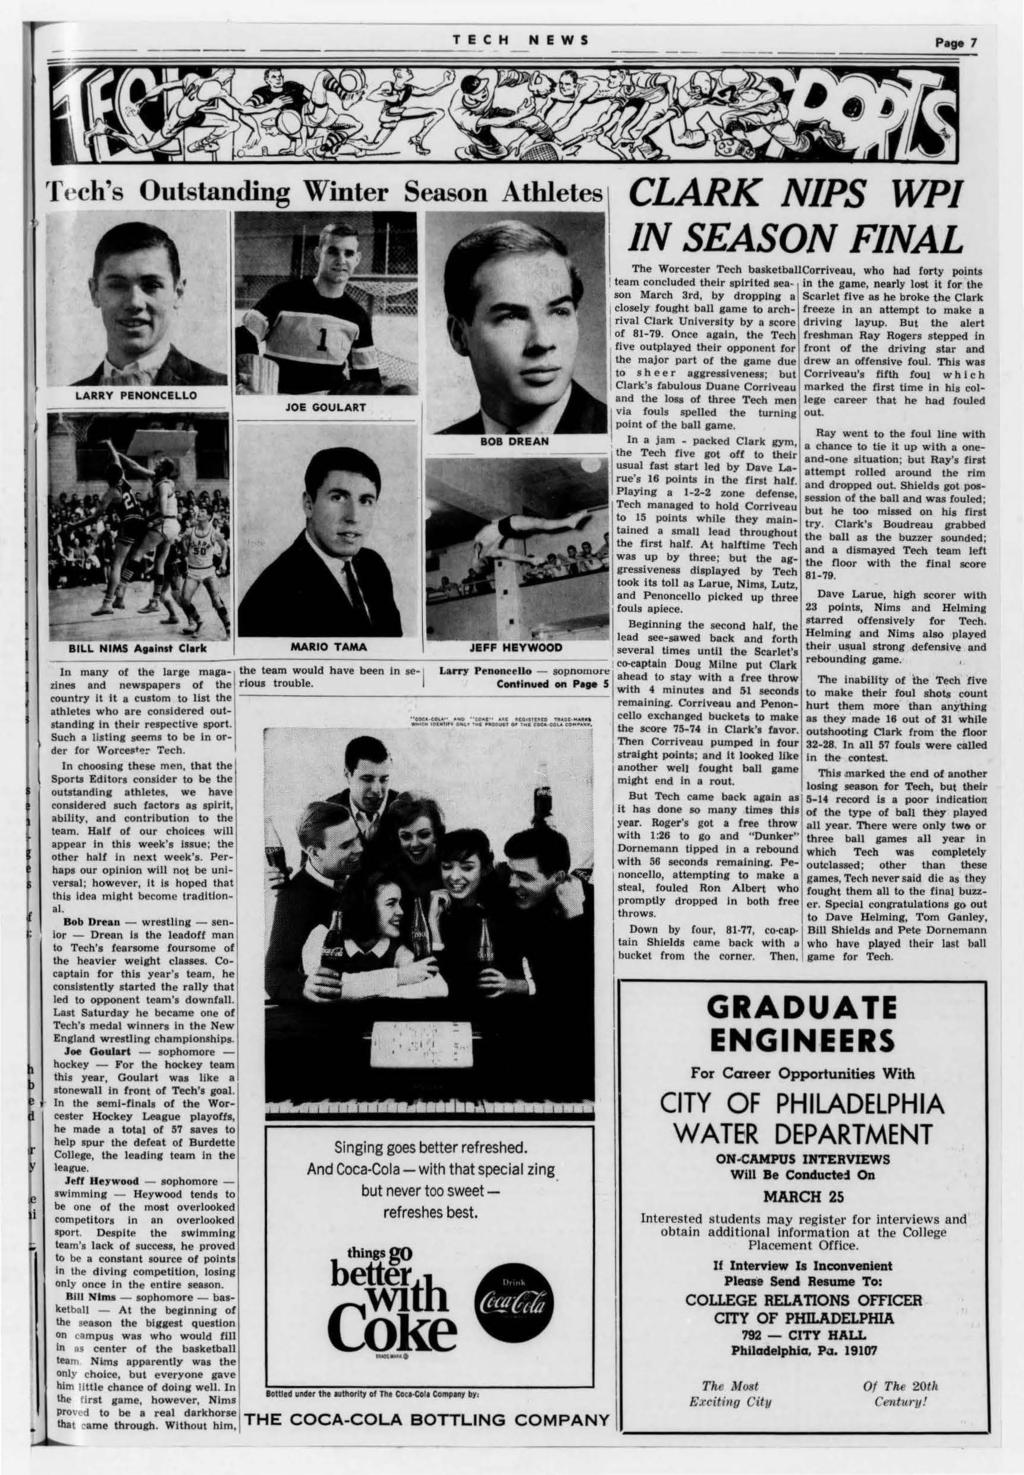 TECH NEWS Page 7 the season the biggest question on campus was who would fill in as center of the basketball team NLms apparently was the only choice, but everyone gave him little chance of doing